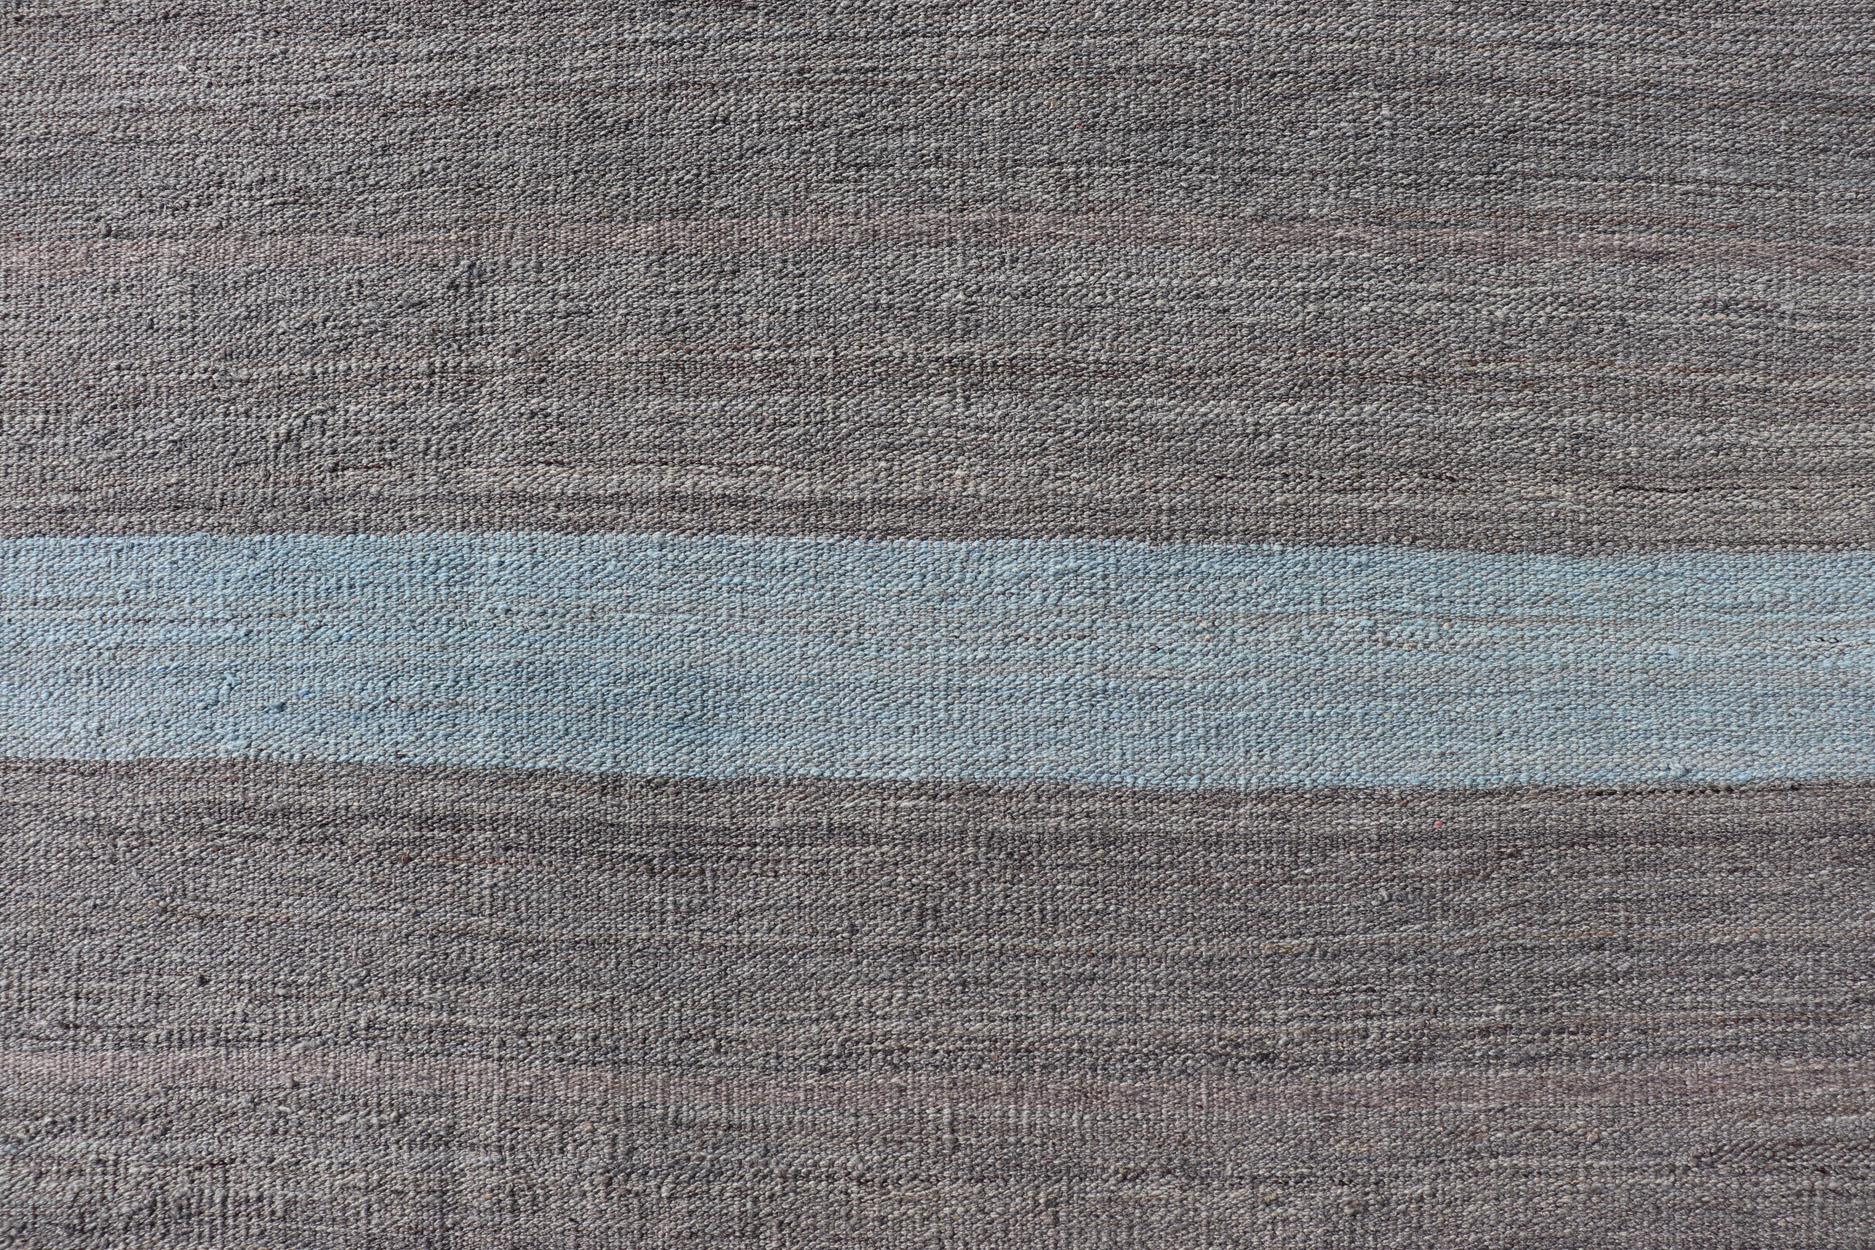 Modern Kilim Casual Rug with Stripes in Shades of Blue, Gray' and Charcoal 3